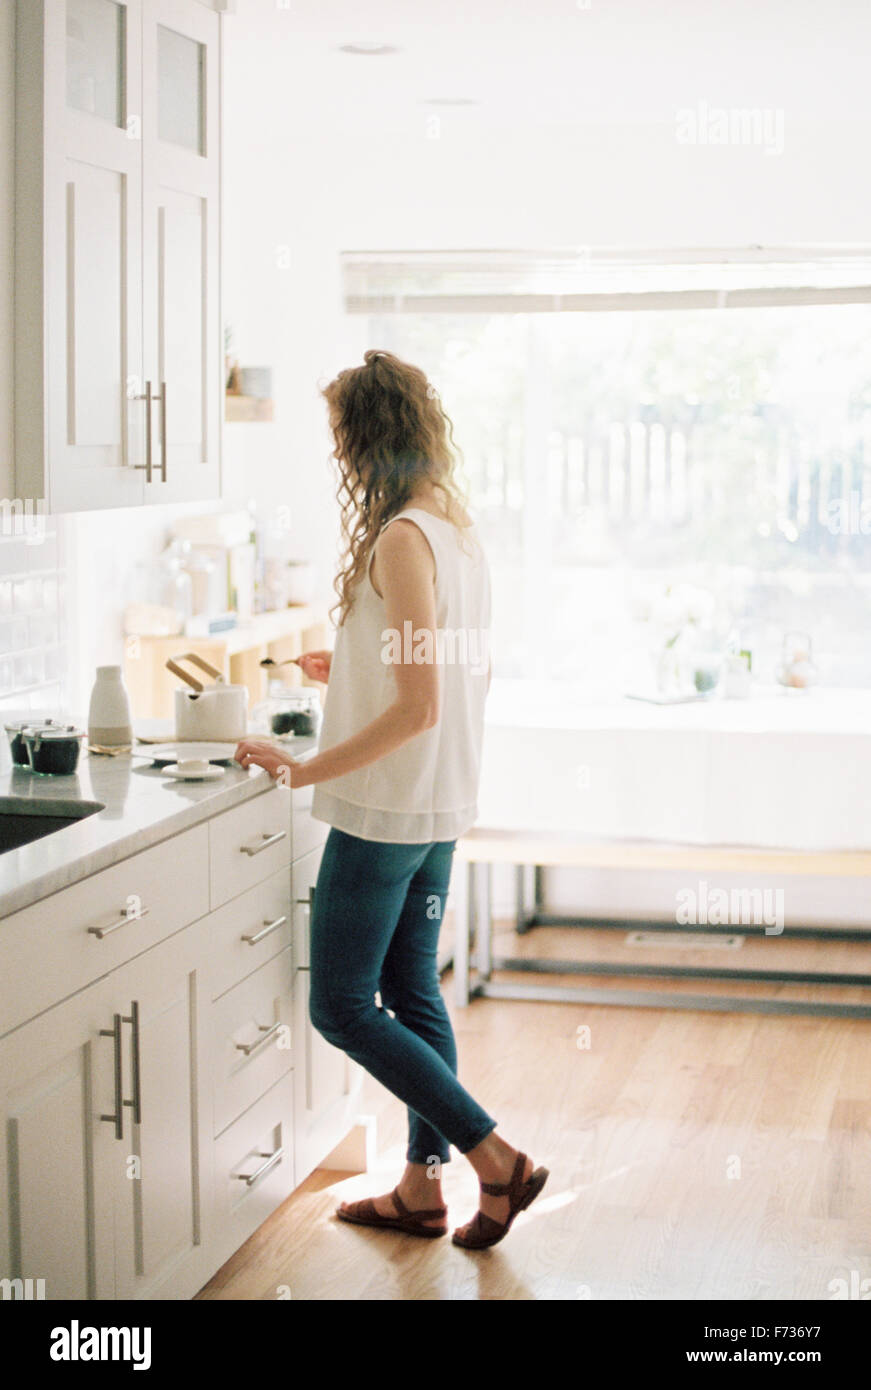 Woman standing in a kitchen preparing a pot of tea. Stock Photo